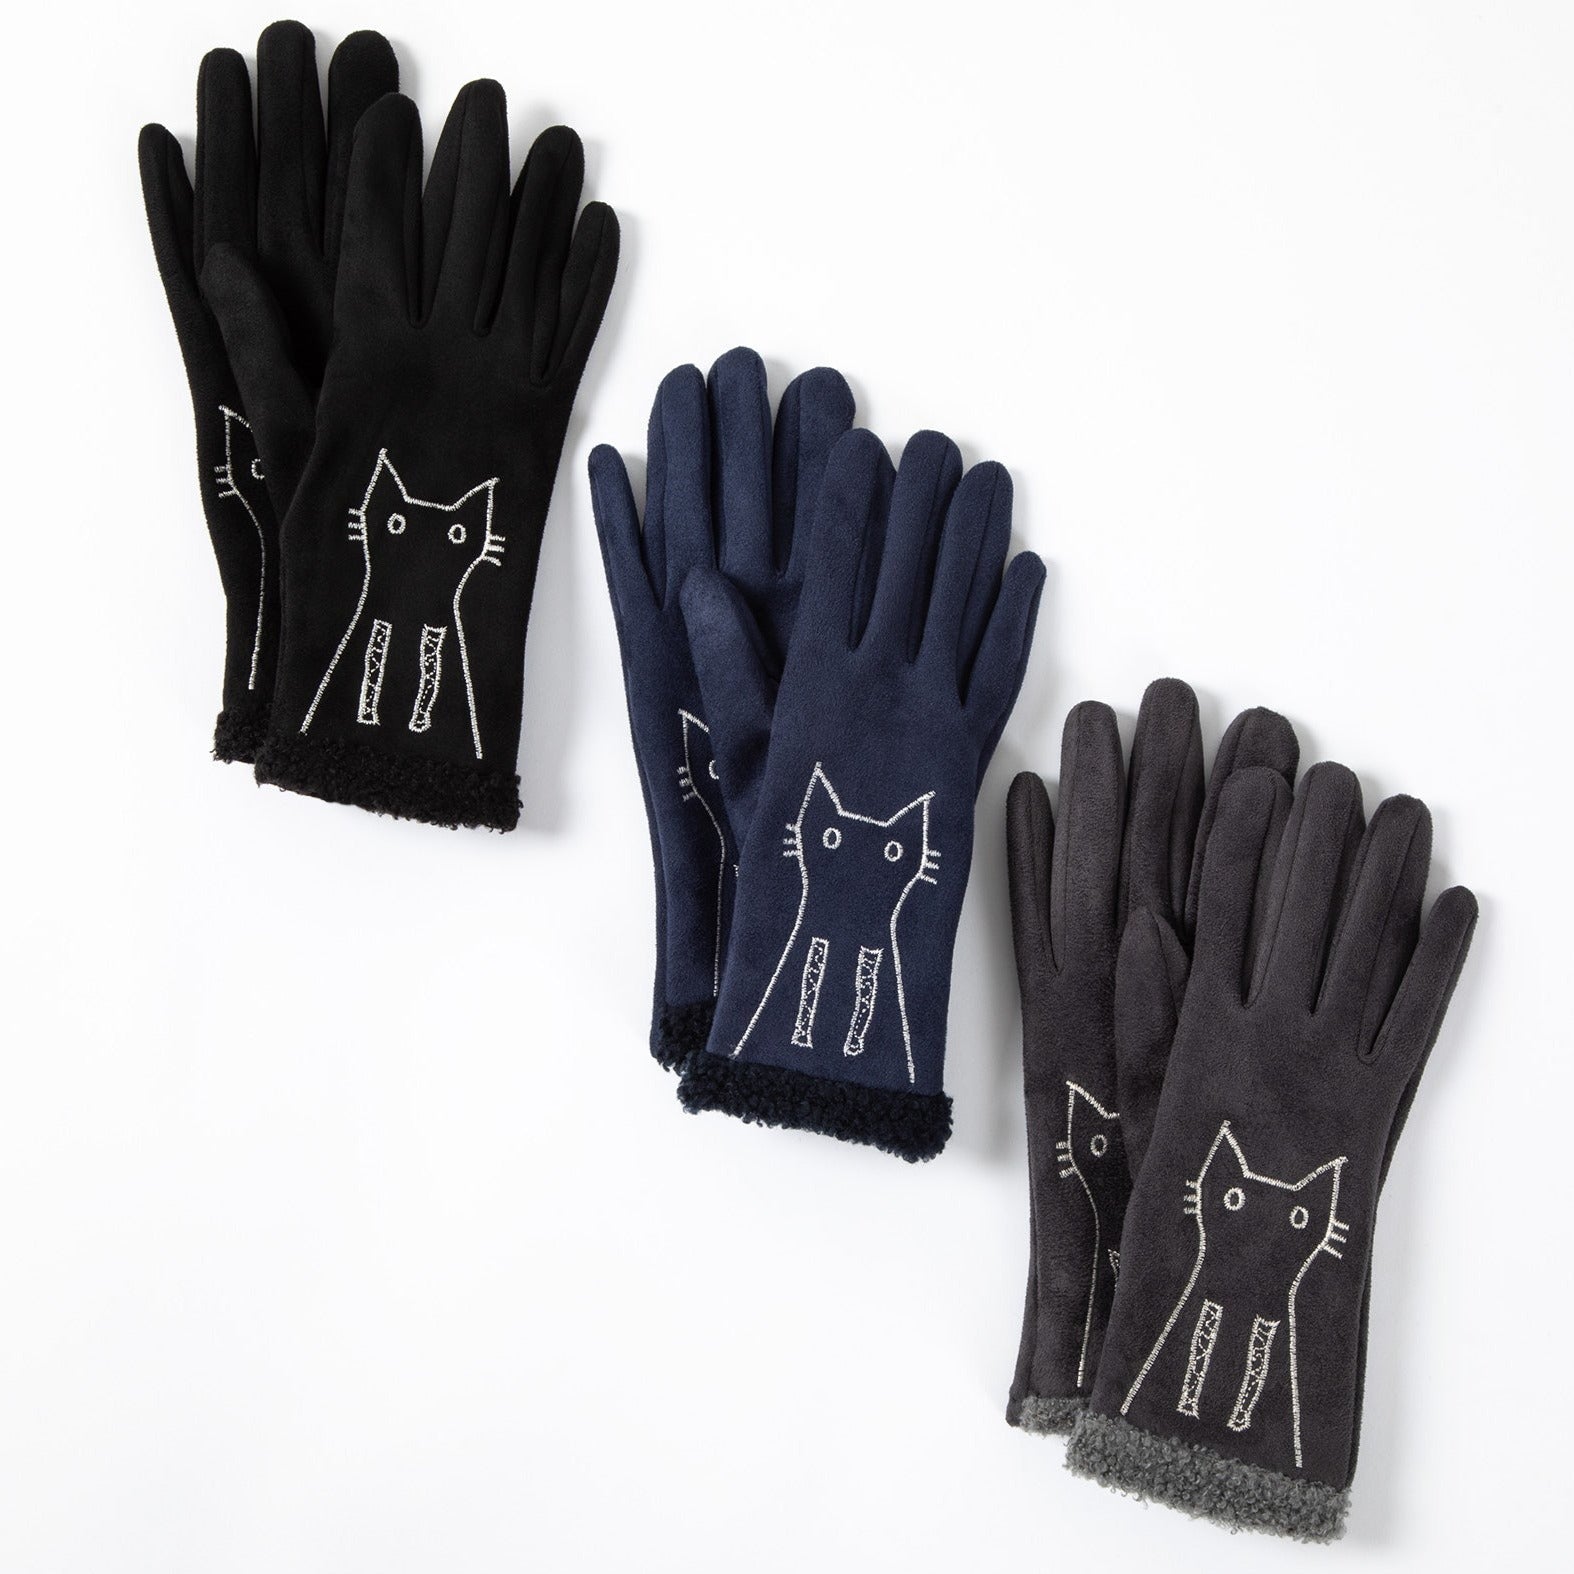 Embroidered Cat & Dog Touch Screen Gloves - Dog - Black